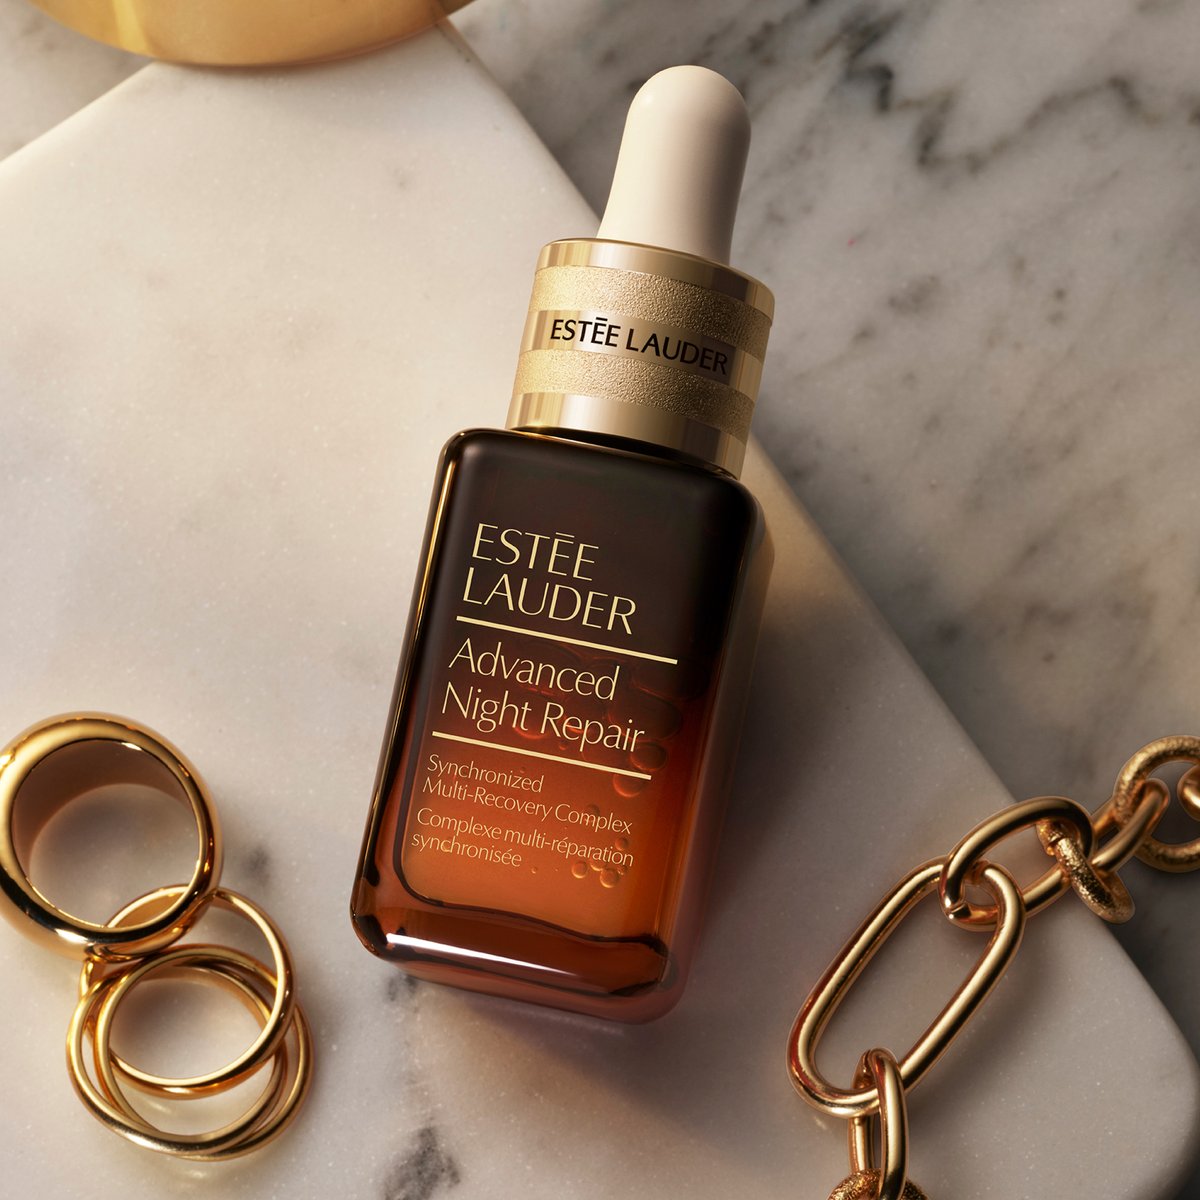 #AdvancedNightRepair serum works night and day to help optimize your skin's rhythm of renewal – and our samples have Big Benefits, Guaranteed. #LittleBrownBottle. Shop your trial size now: estee.cm/3quzmSF